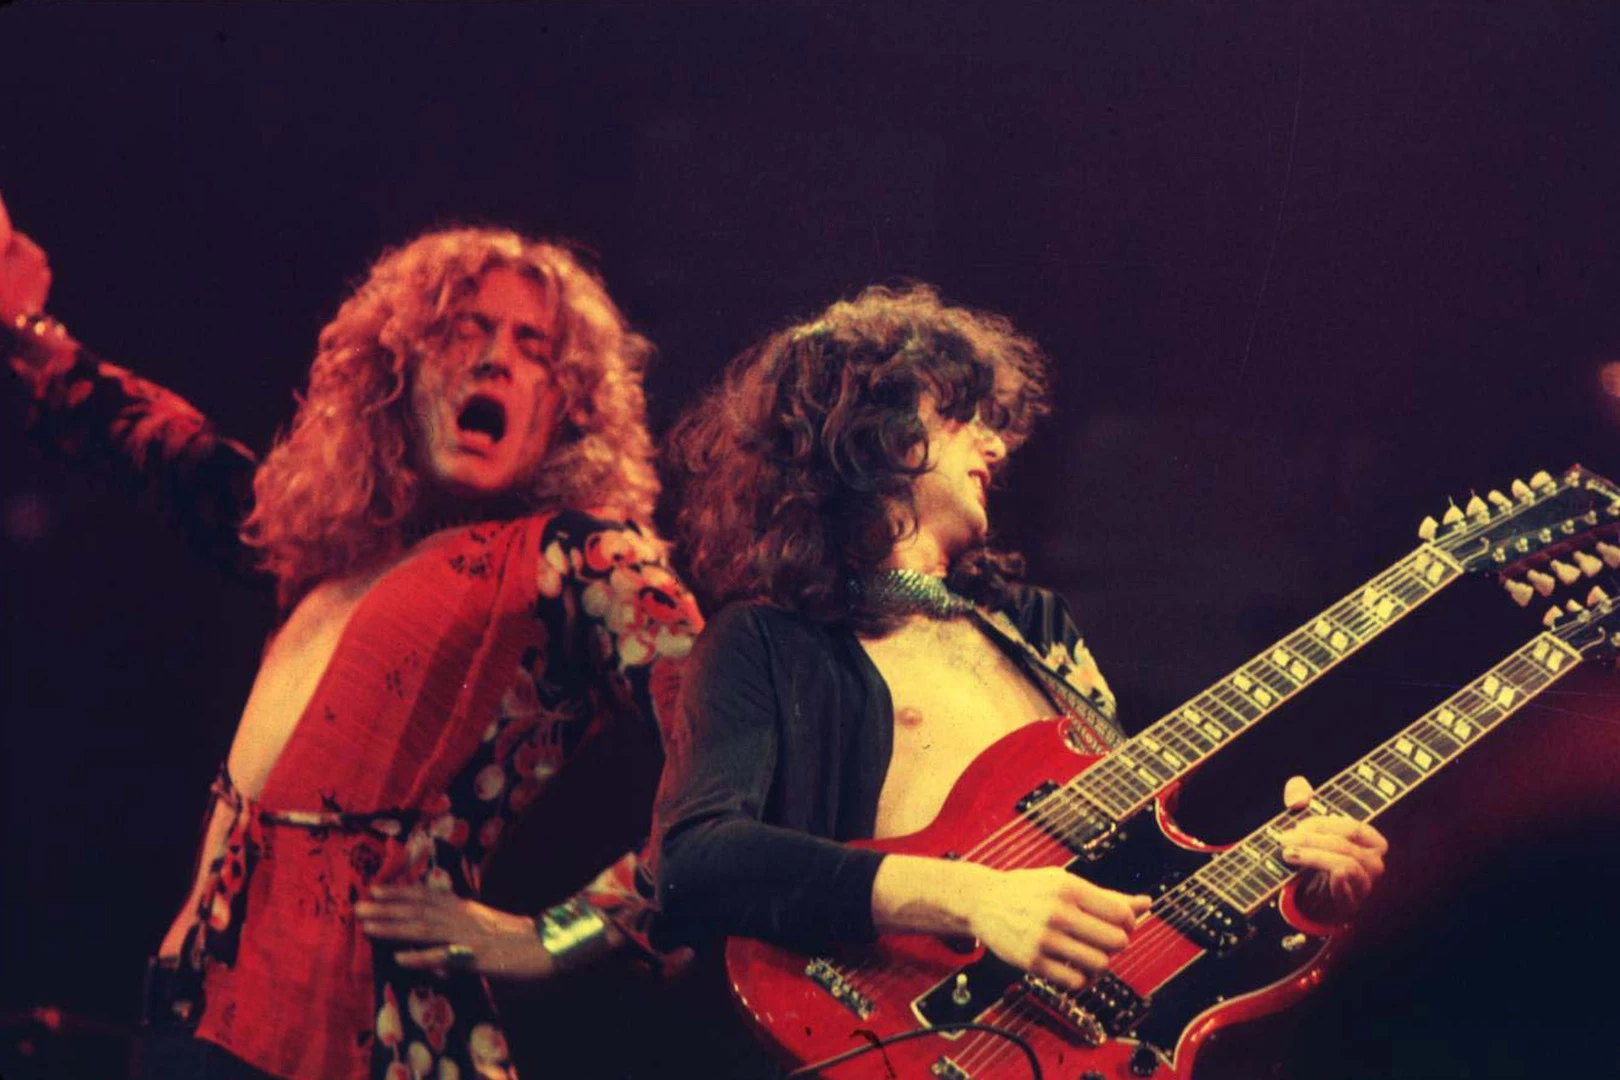 Poll: What’s the Best Led Zeppelin Song? – Vote Now